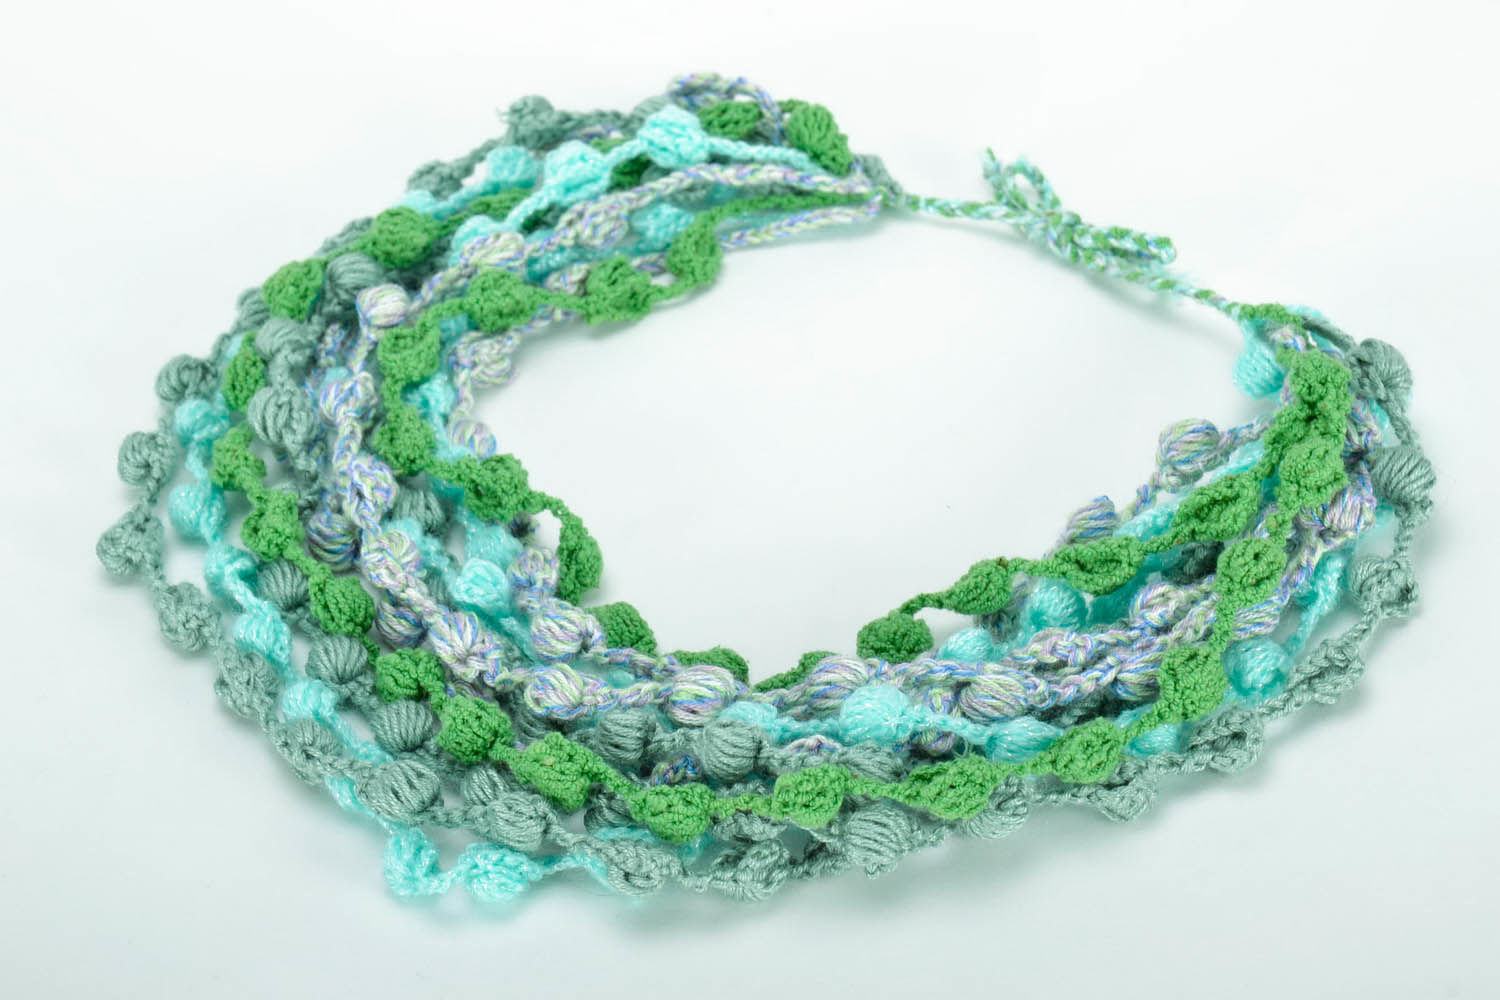 Crocheted bead necklace photo 4